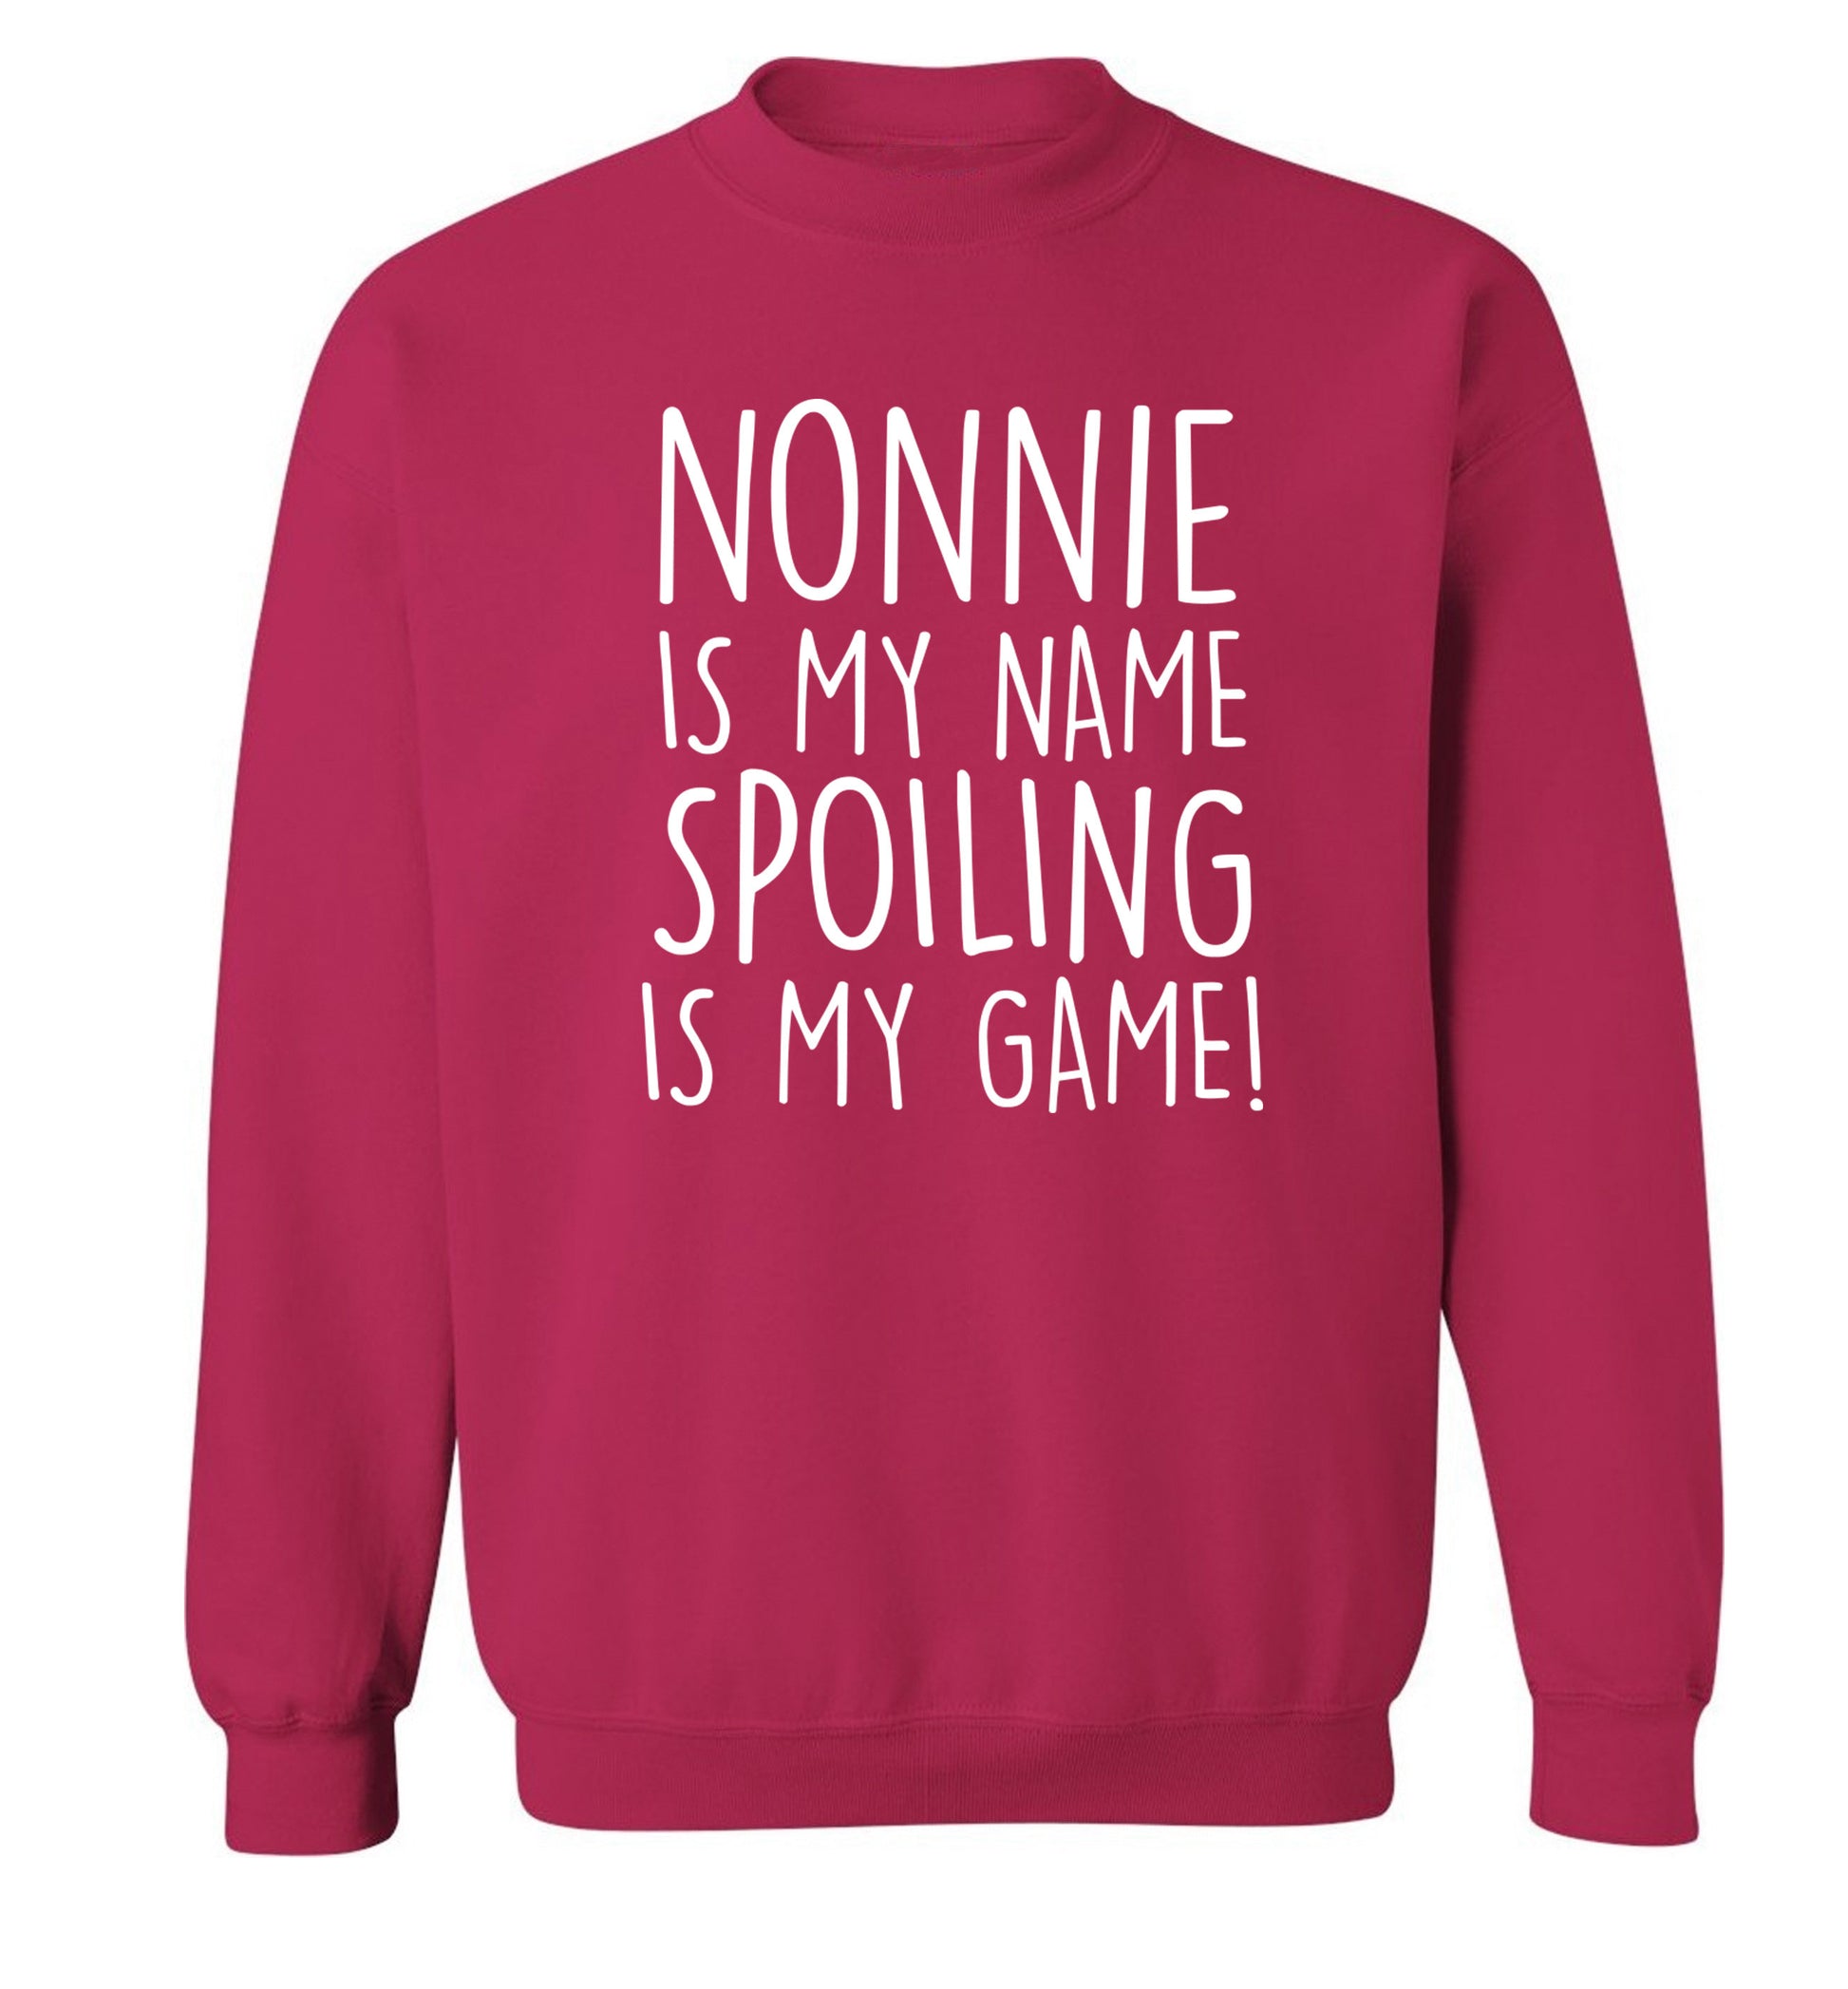 Nonnie is my name, spoiling is my game Adult's unisex pink Sweater 2XL